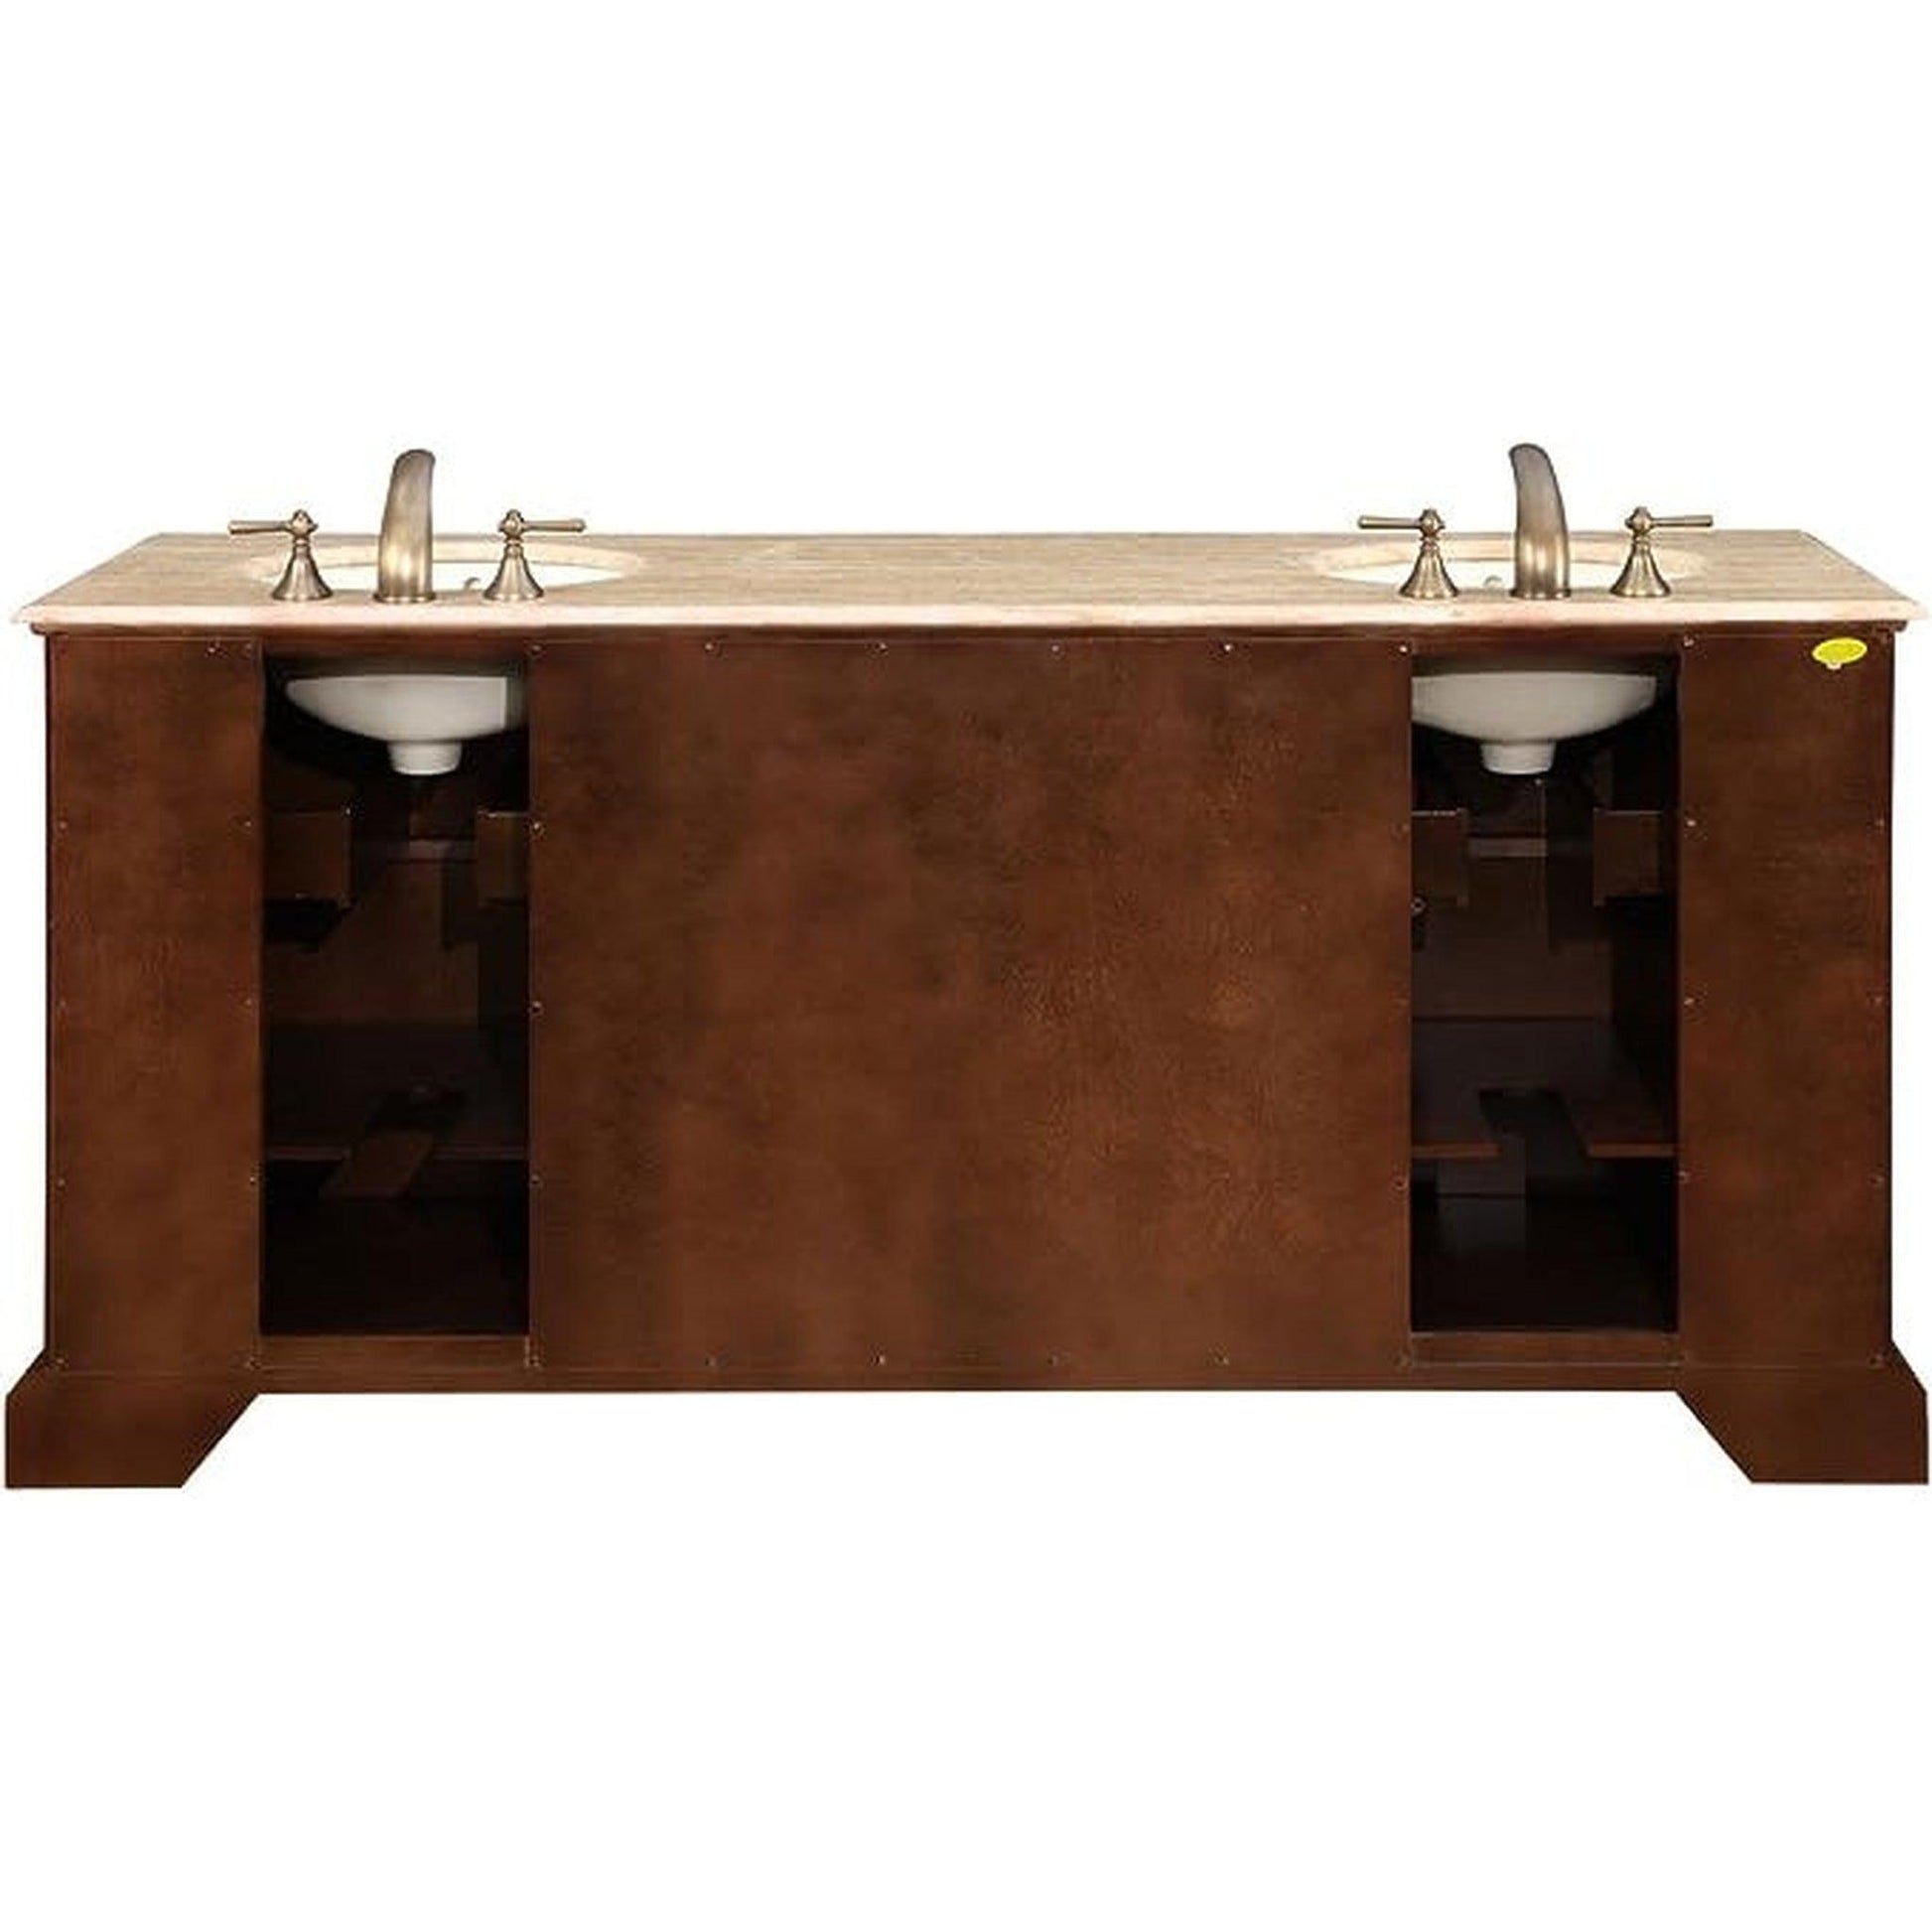 Silkroad Exclusive 72" Double Sink Red Chestnut Bathroom Vanity With Travertine Countertop and Ivory Ceramic Undermount Sink